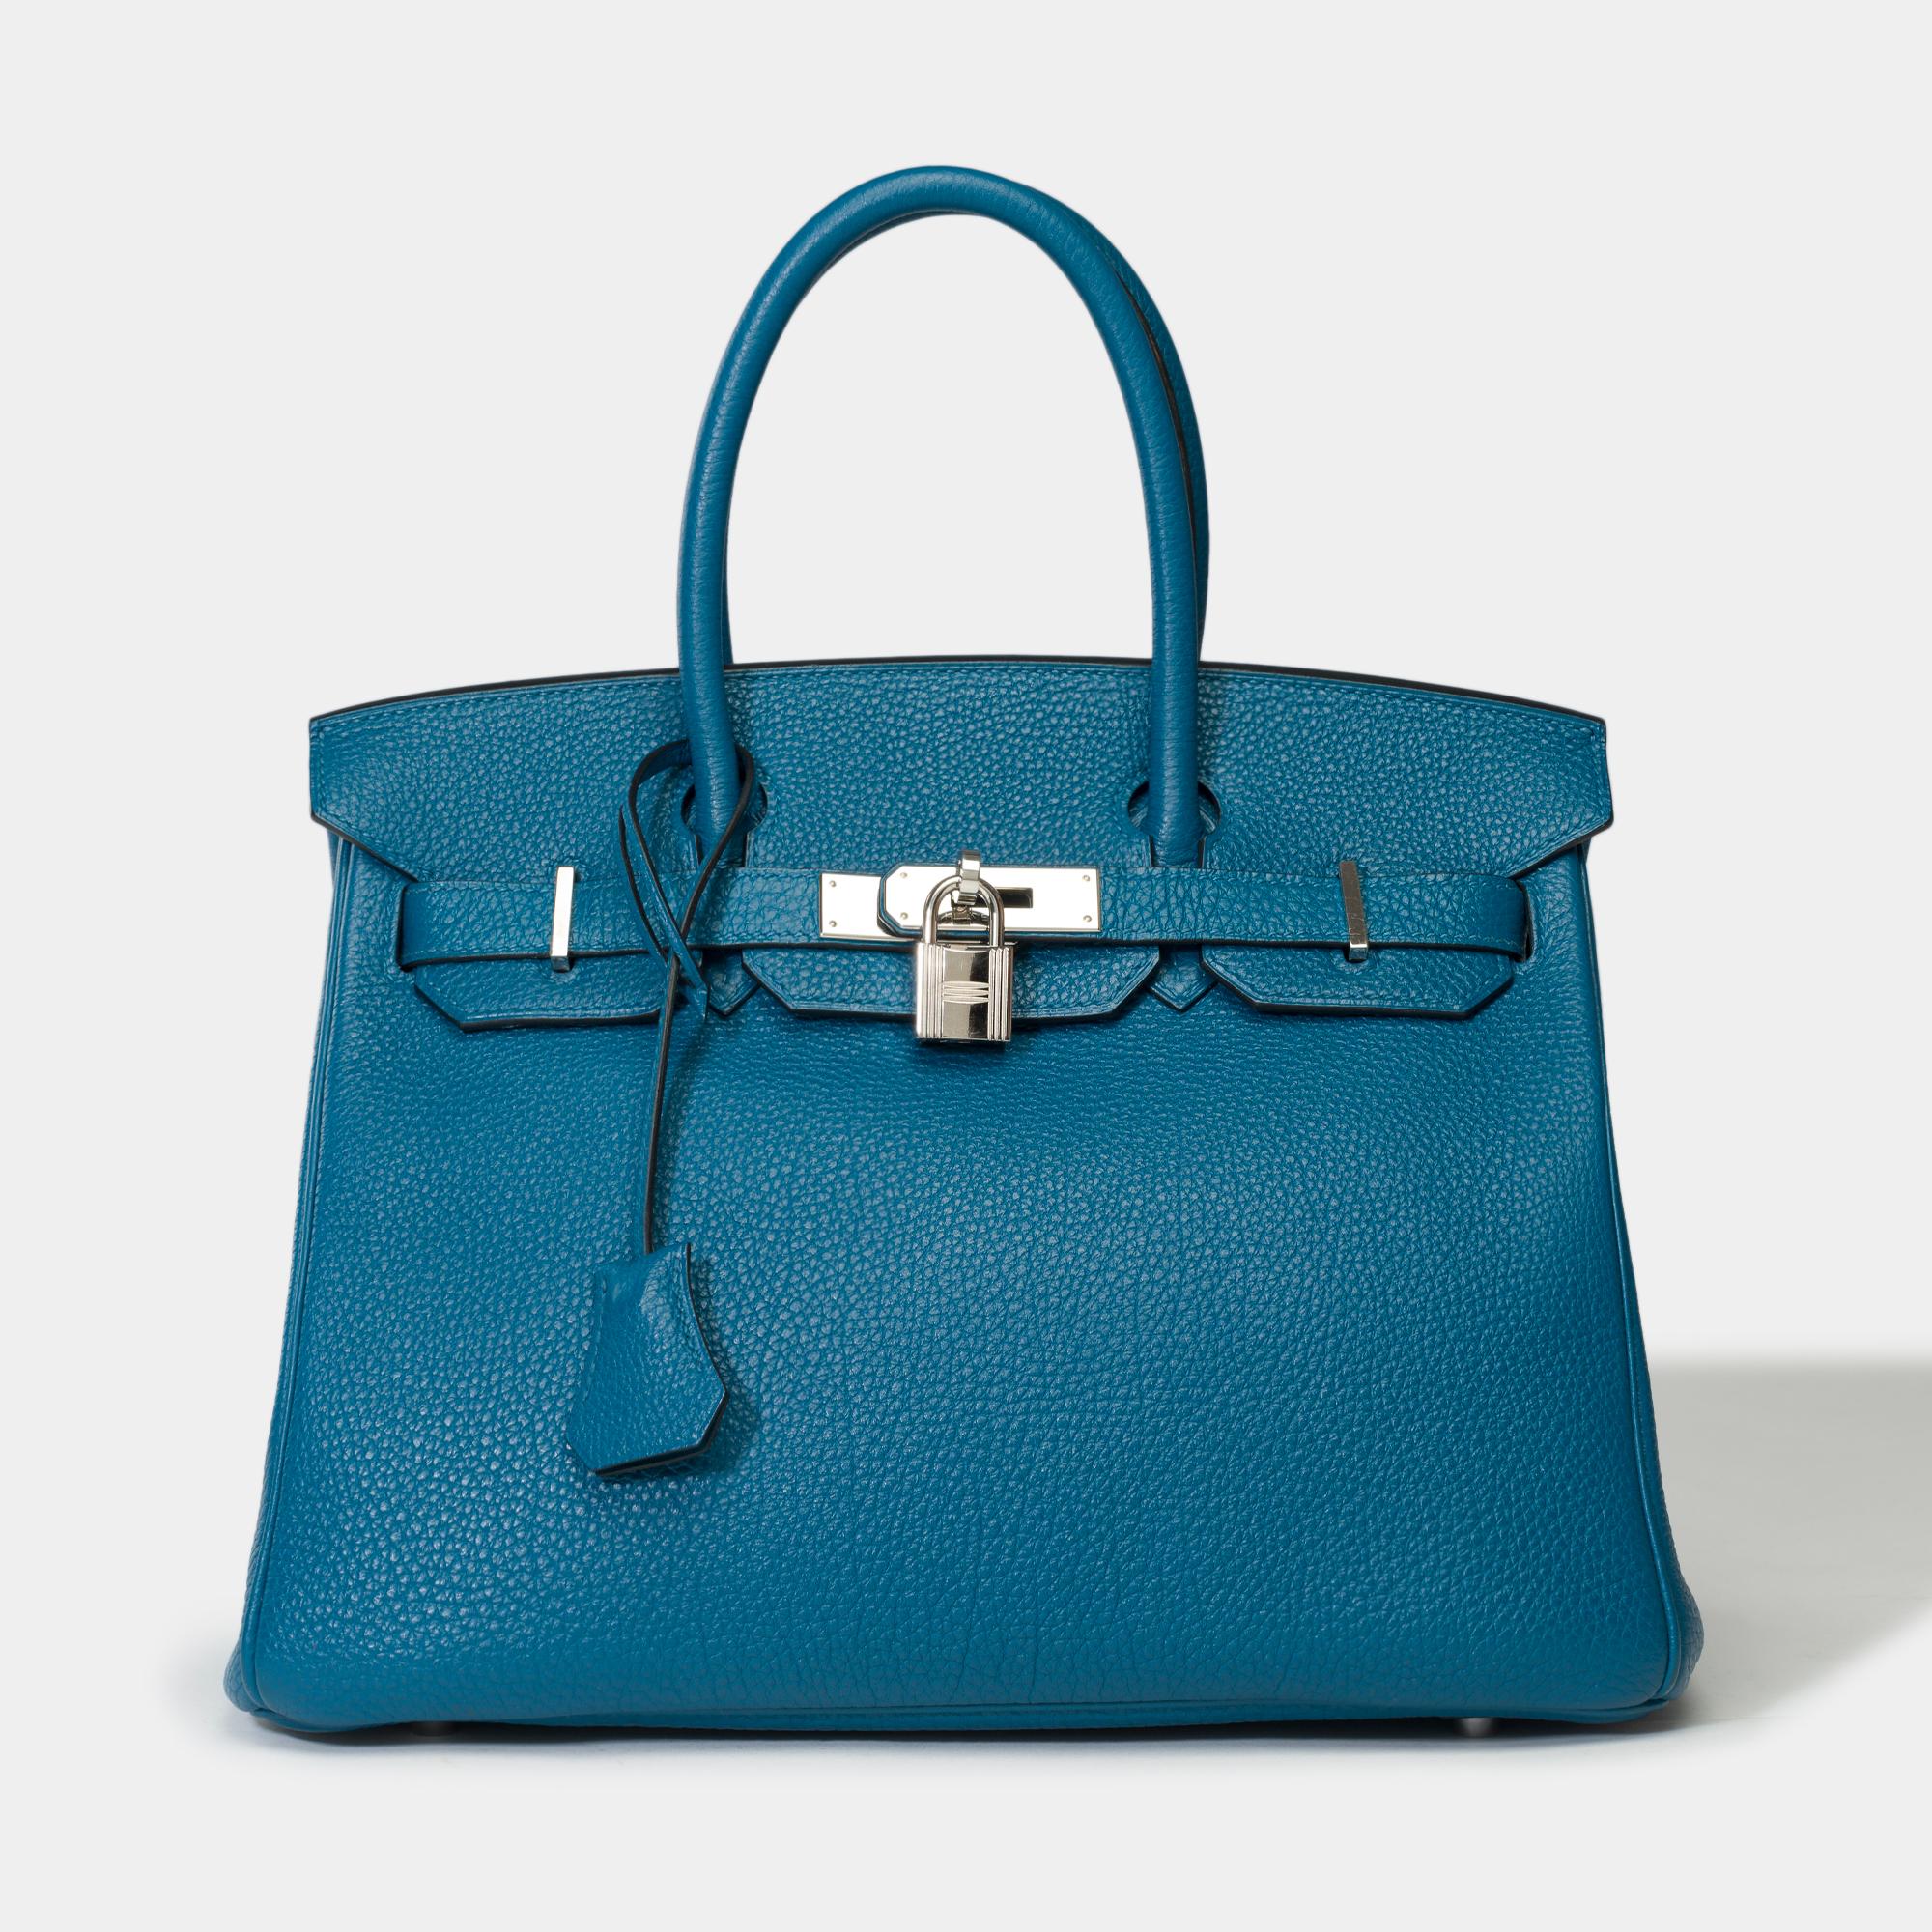 Amazing​​ ​​and​​ ​​Bright​​ ​​Hermes​​ ​​Birkin​​ ​​30​​ ​​handbag​​ ​​in​​ ​​Blue​ ​​Togo​​ ​​leather​​ ​​,​​ ​​palladium​​ ​​silver​​ ​​metal​​ ​​trim​​ ​​,​​ ​​double​​ ​​handle​​ ​​in​​ ​​blue​ ​​leather​​ ​​for​​ ​​hand​​ ​​carry

Flap​​